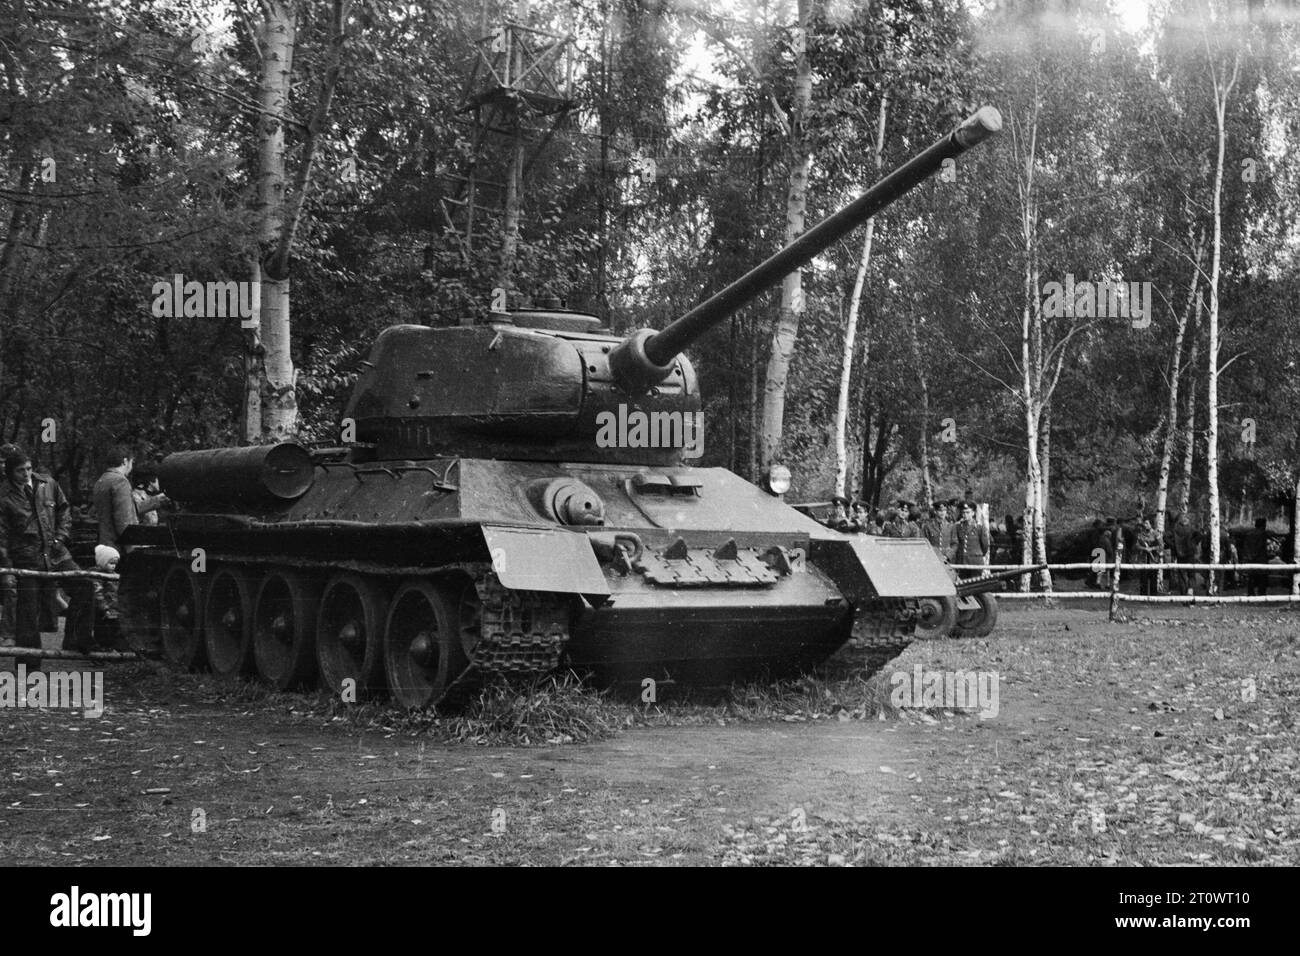 Moscow, USSR - September, 1979: T-34 Soviet tank from WWII in '60 years of Soviet cinema' exhibition in VDNKh. Black and white 35mm film scan Stock Photo